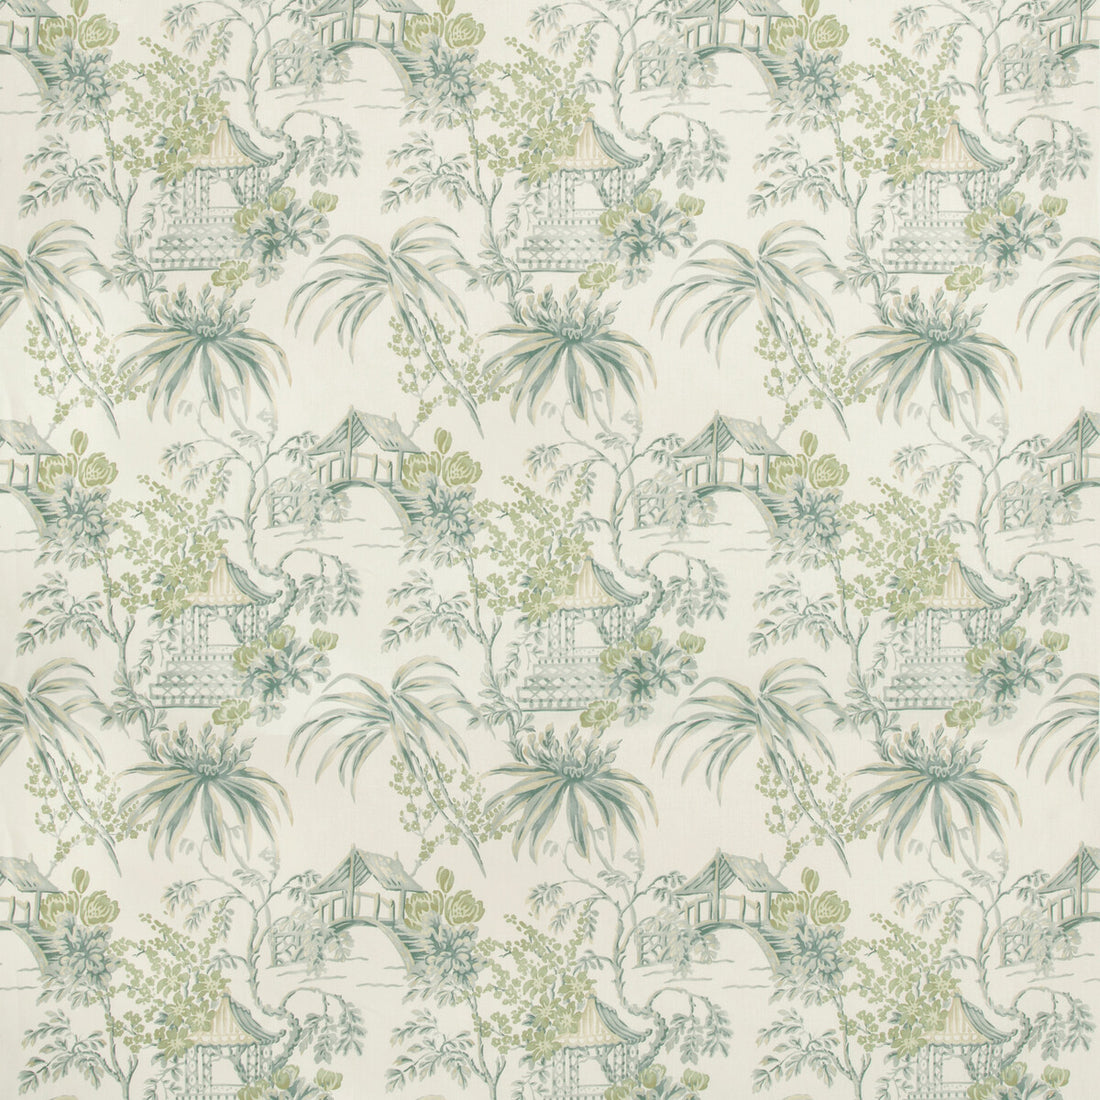 Tongli Print fabric in lagoon color - pattern 8019138.133.0 - by Brunschwig &amp; Fils in the Summer Palace collection